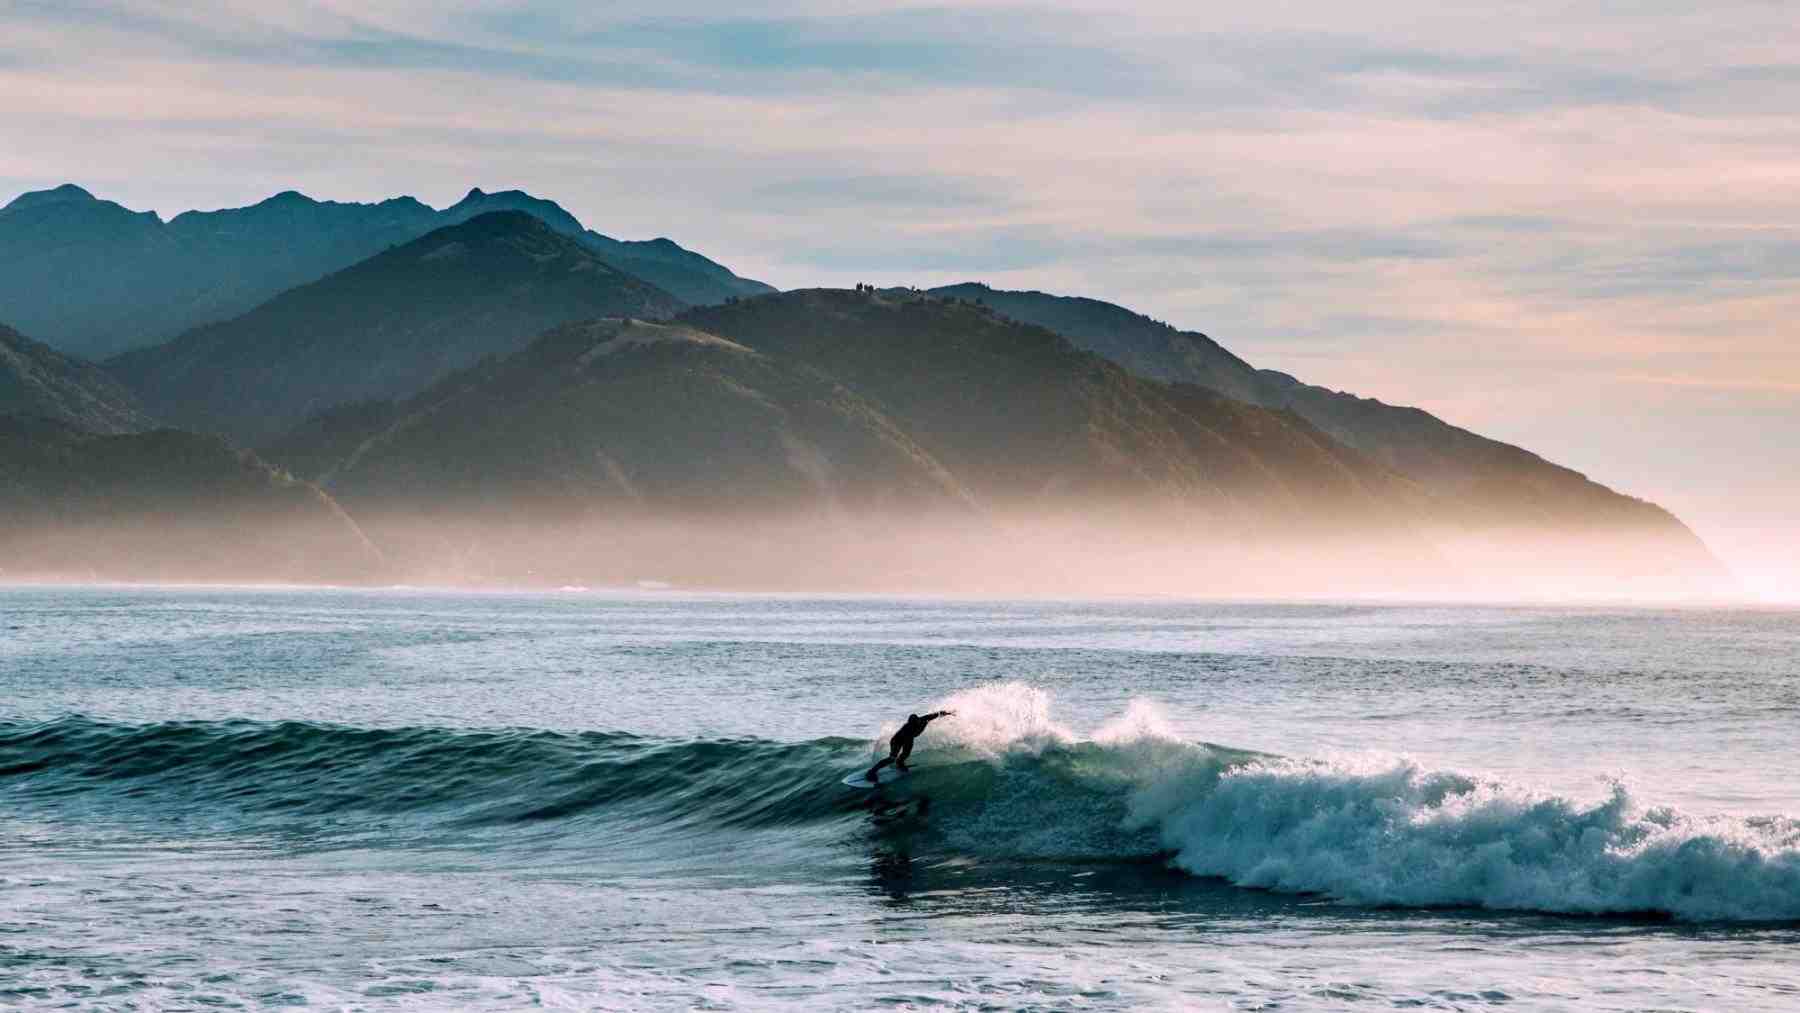 How hard should it be to put on a wetsuit?